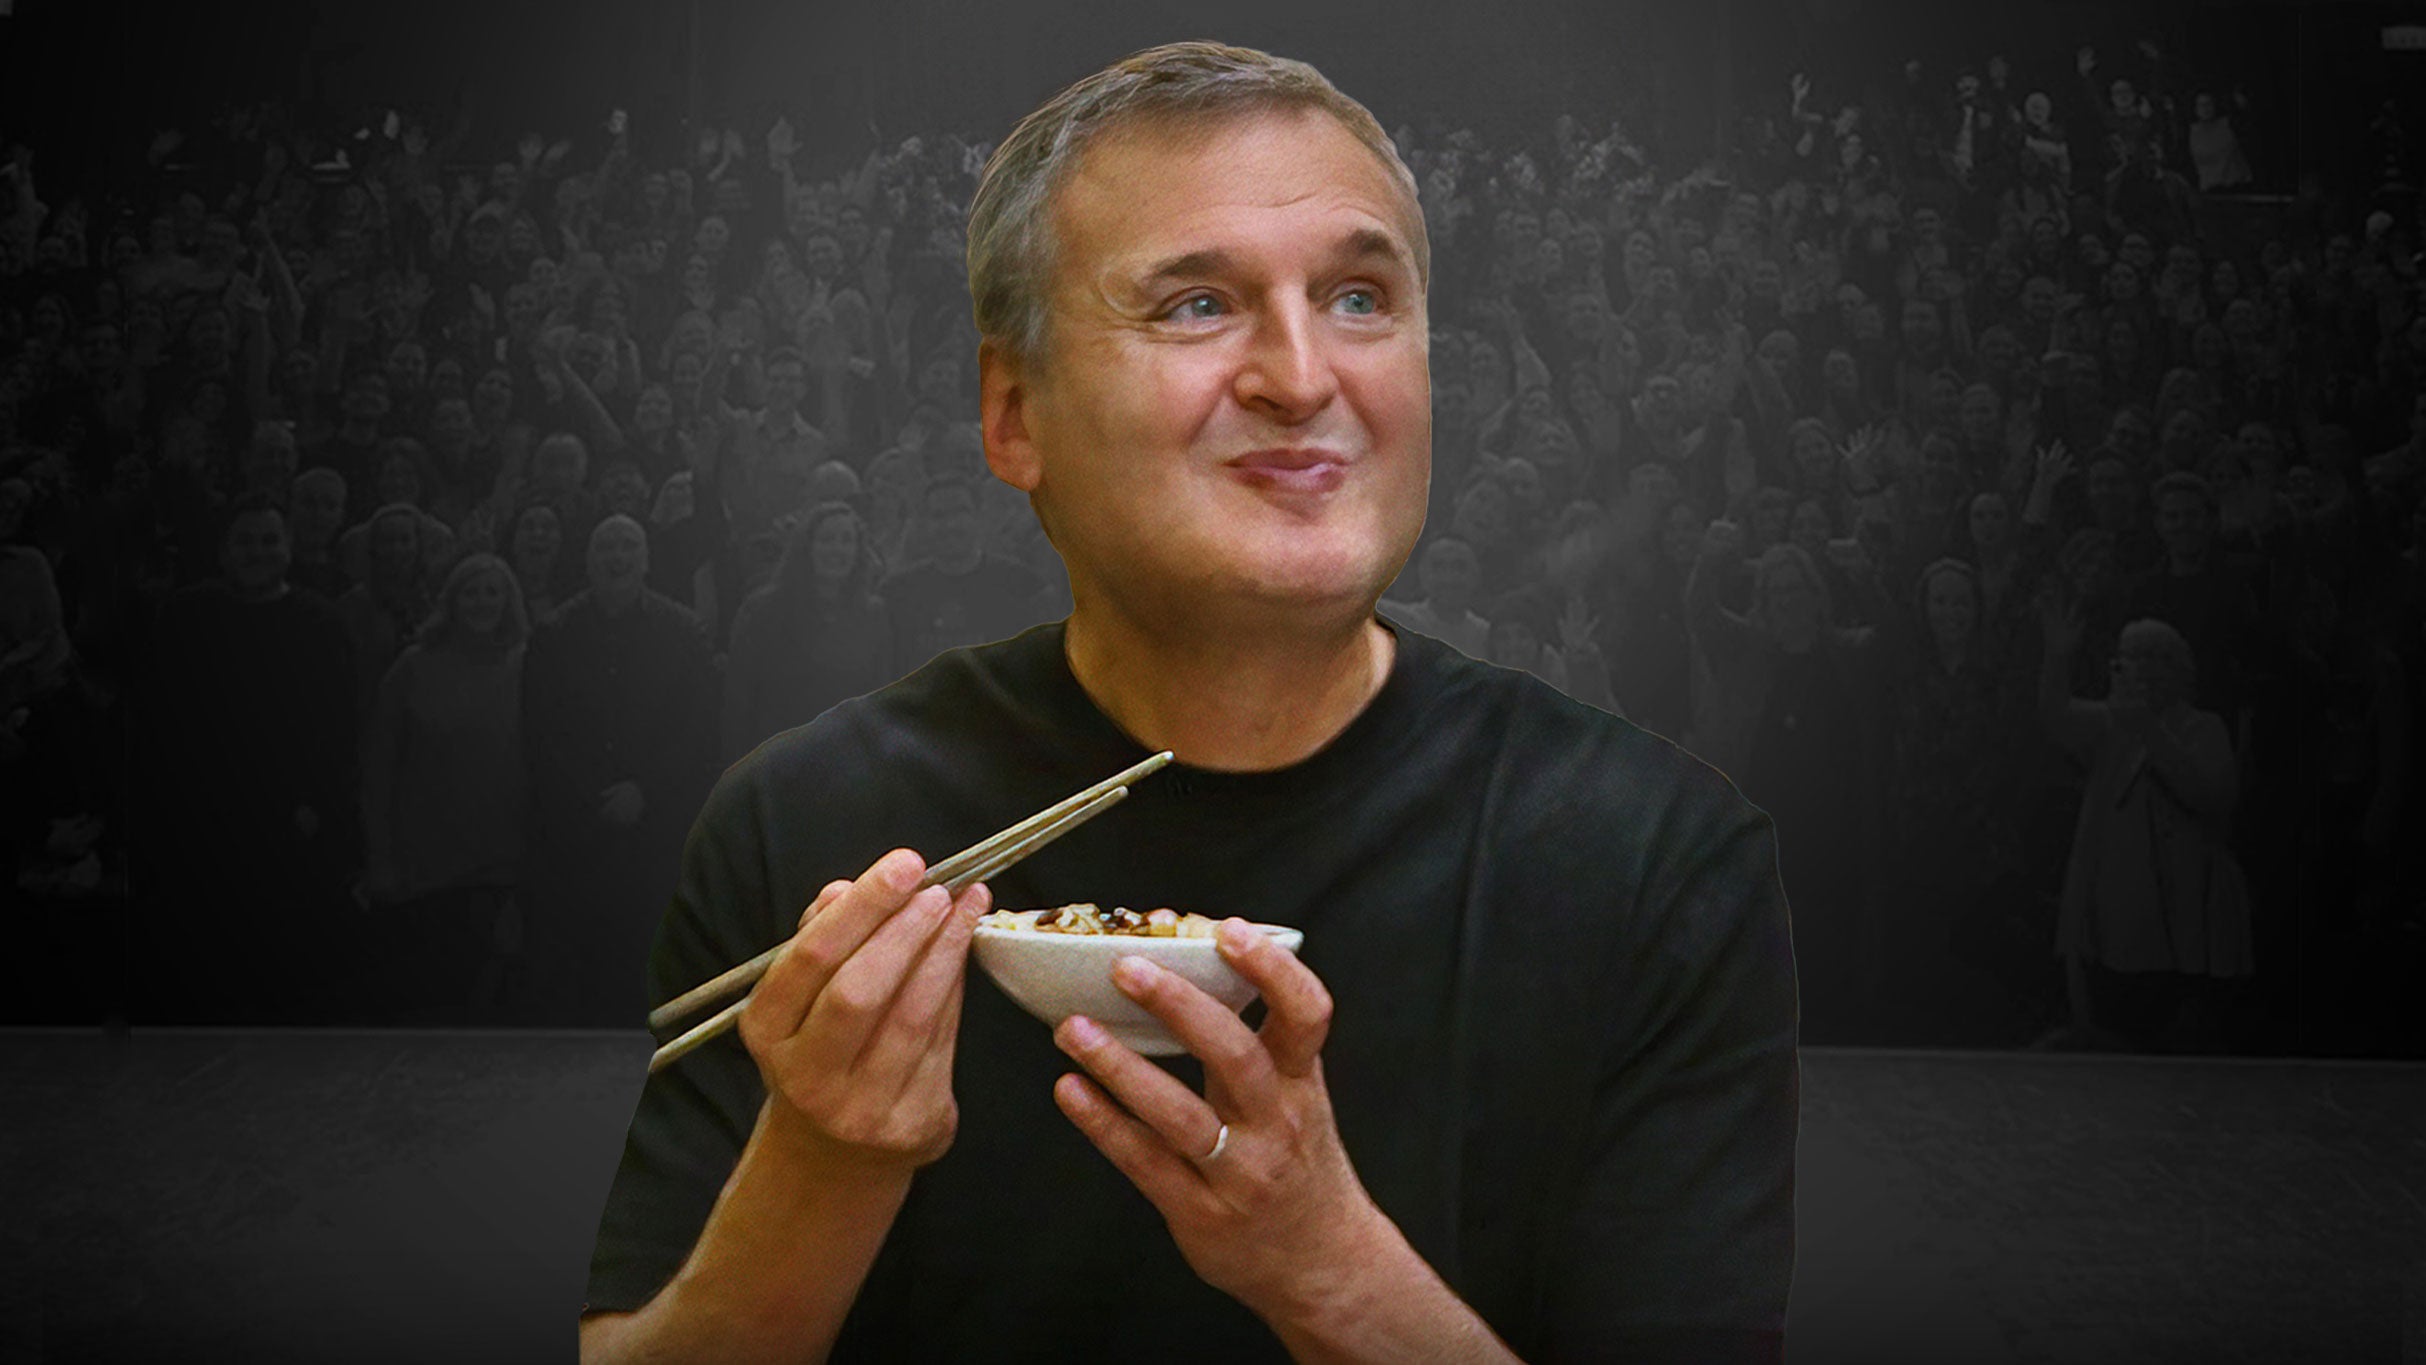 Ticket Reselling Netflix Is A Joke Presents: Phil Rosenthal of &quot;Somebody Feed Phil&quot;